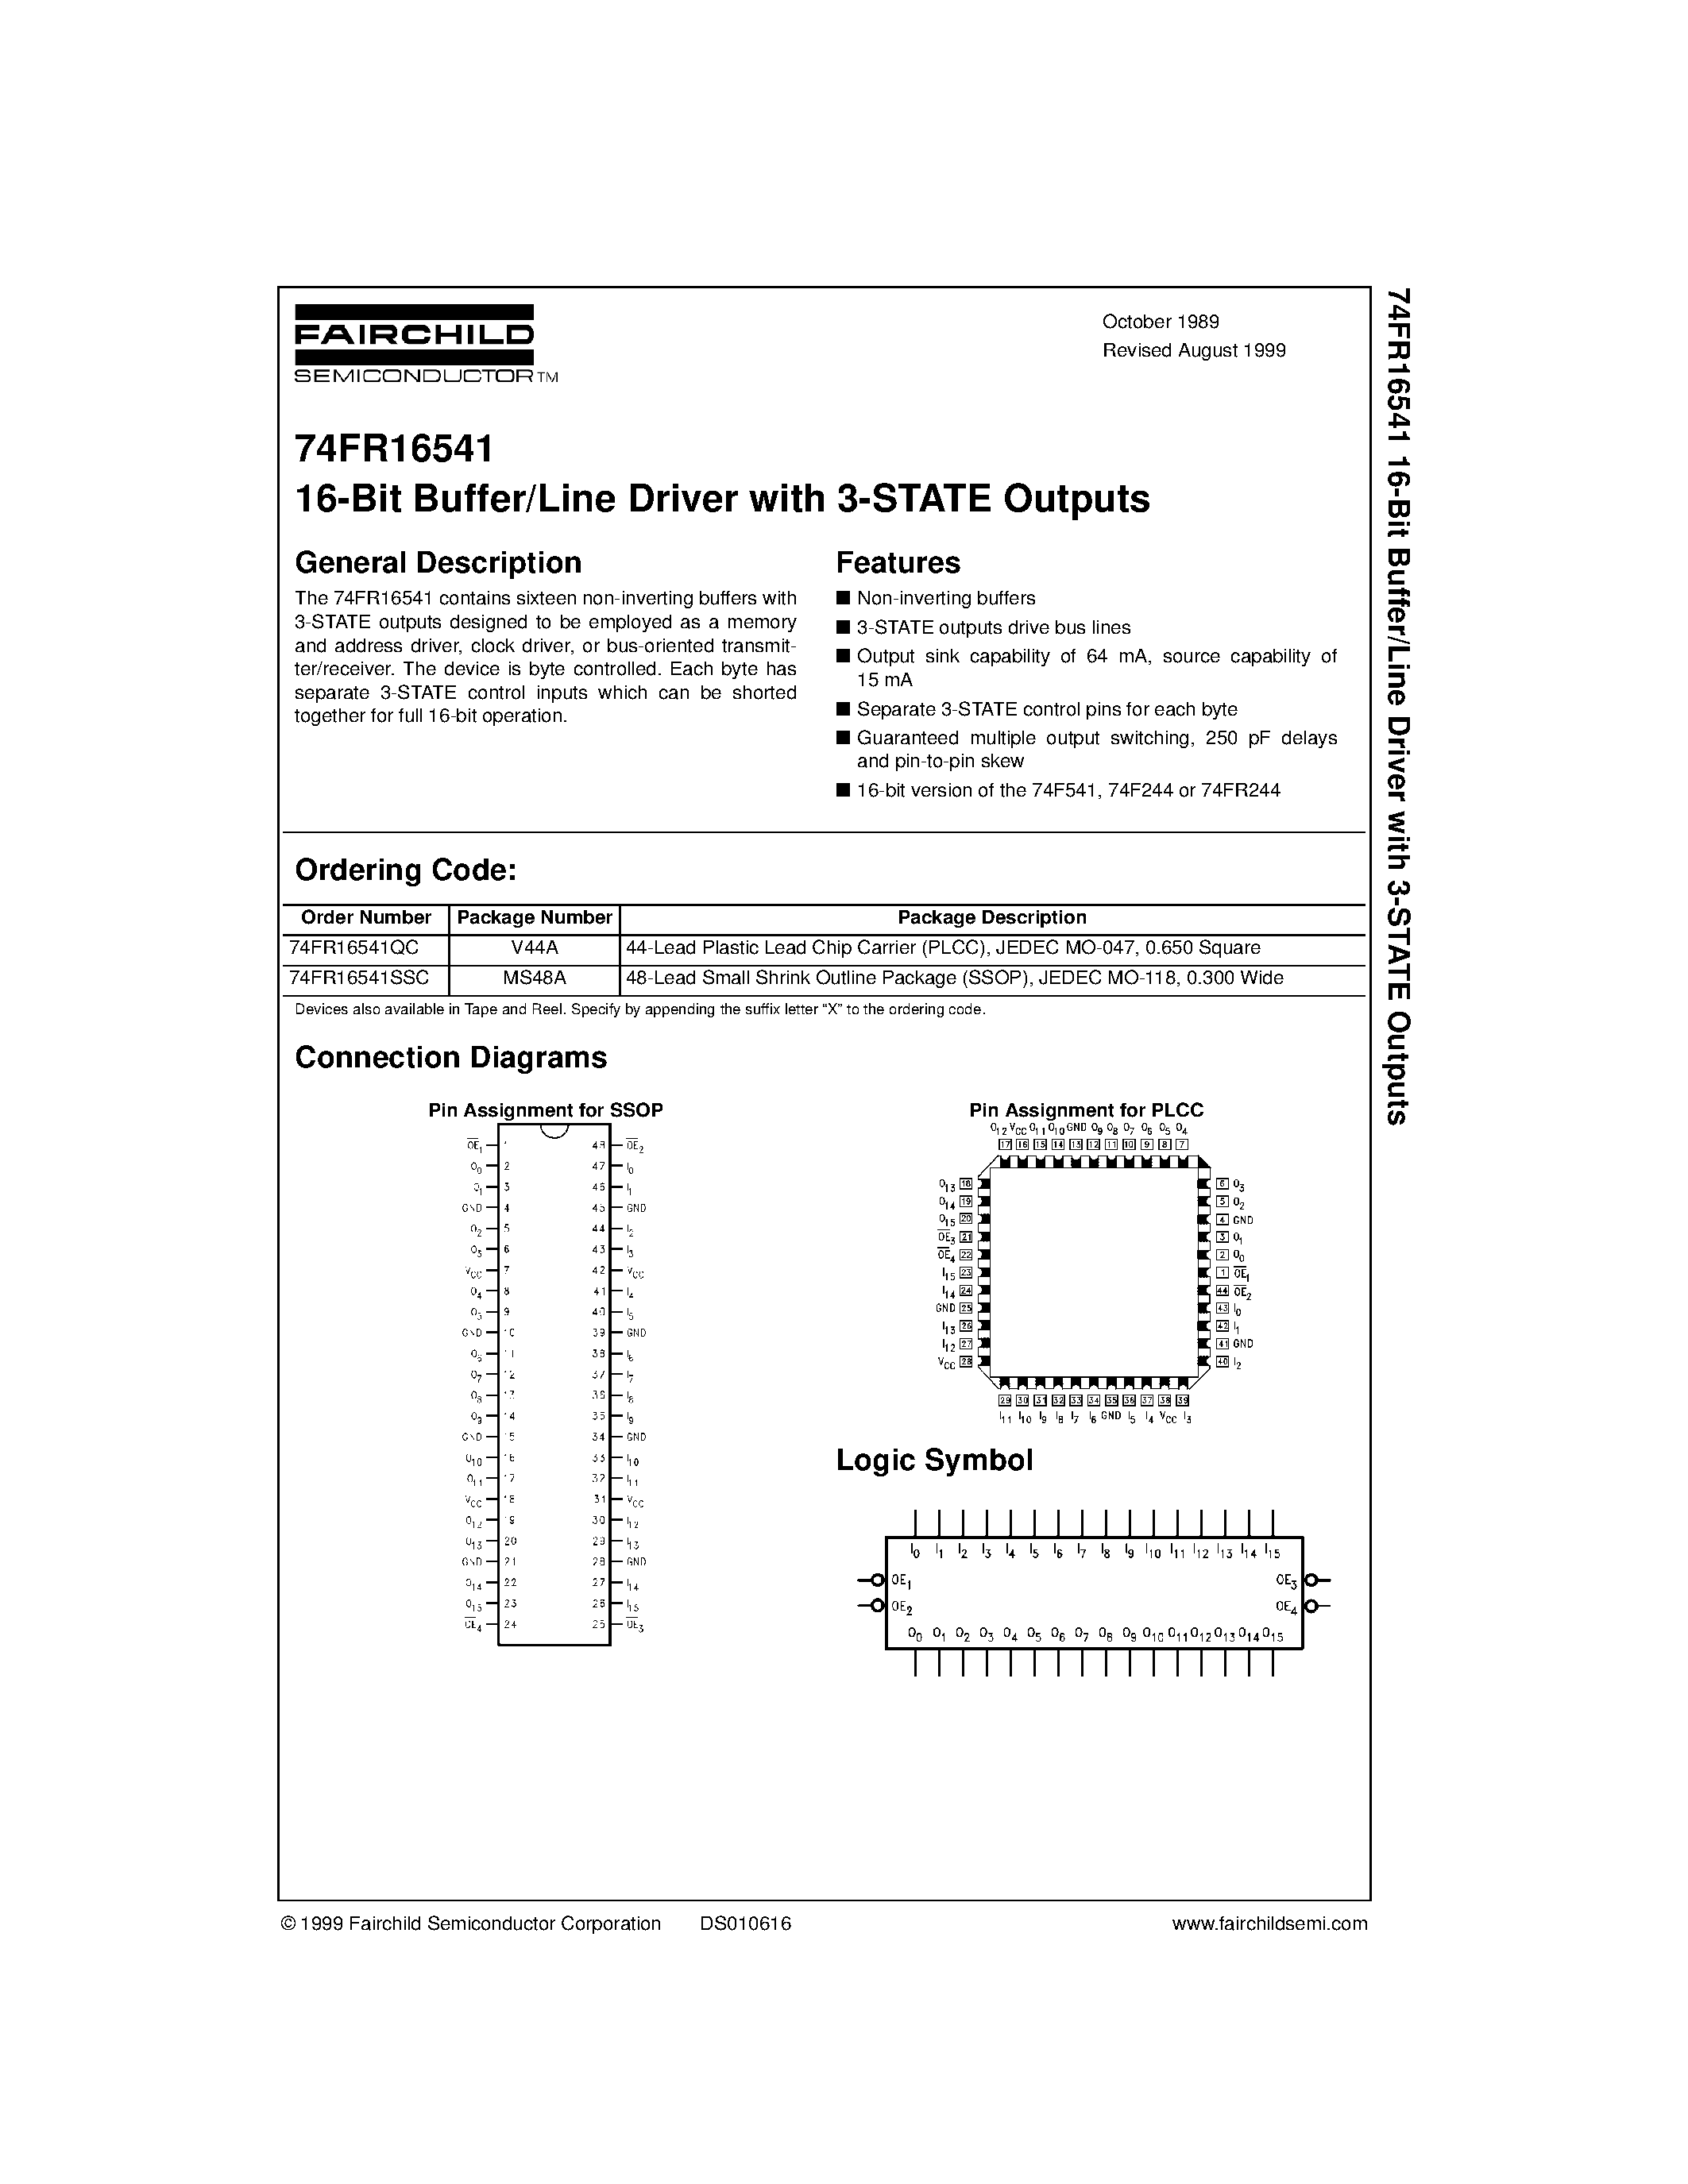 Datasheet 74FR16541SSC - 16-Bit Buffer/Line Driver with 3-STATE Outputs page 1